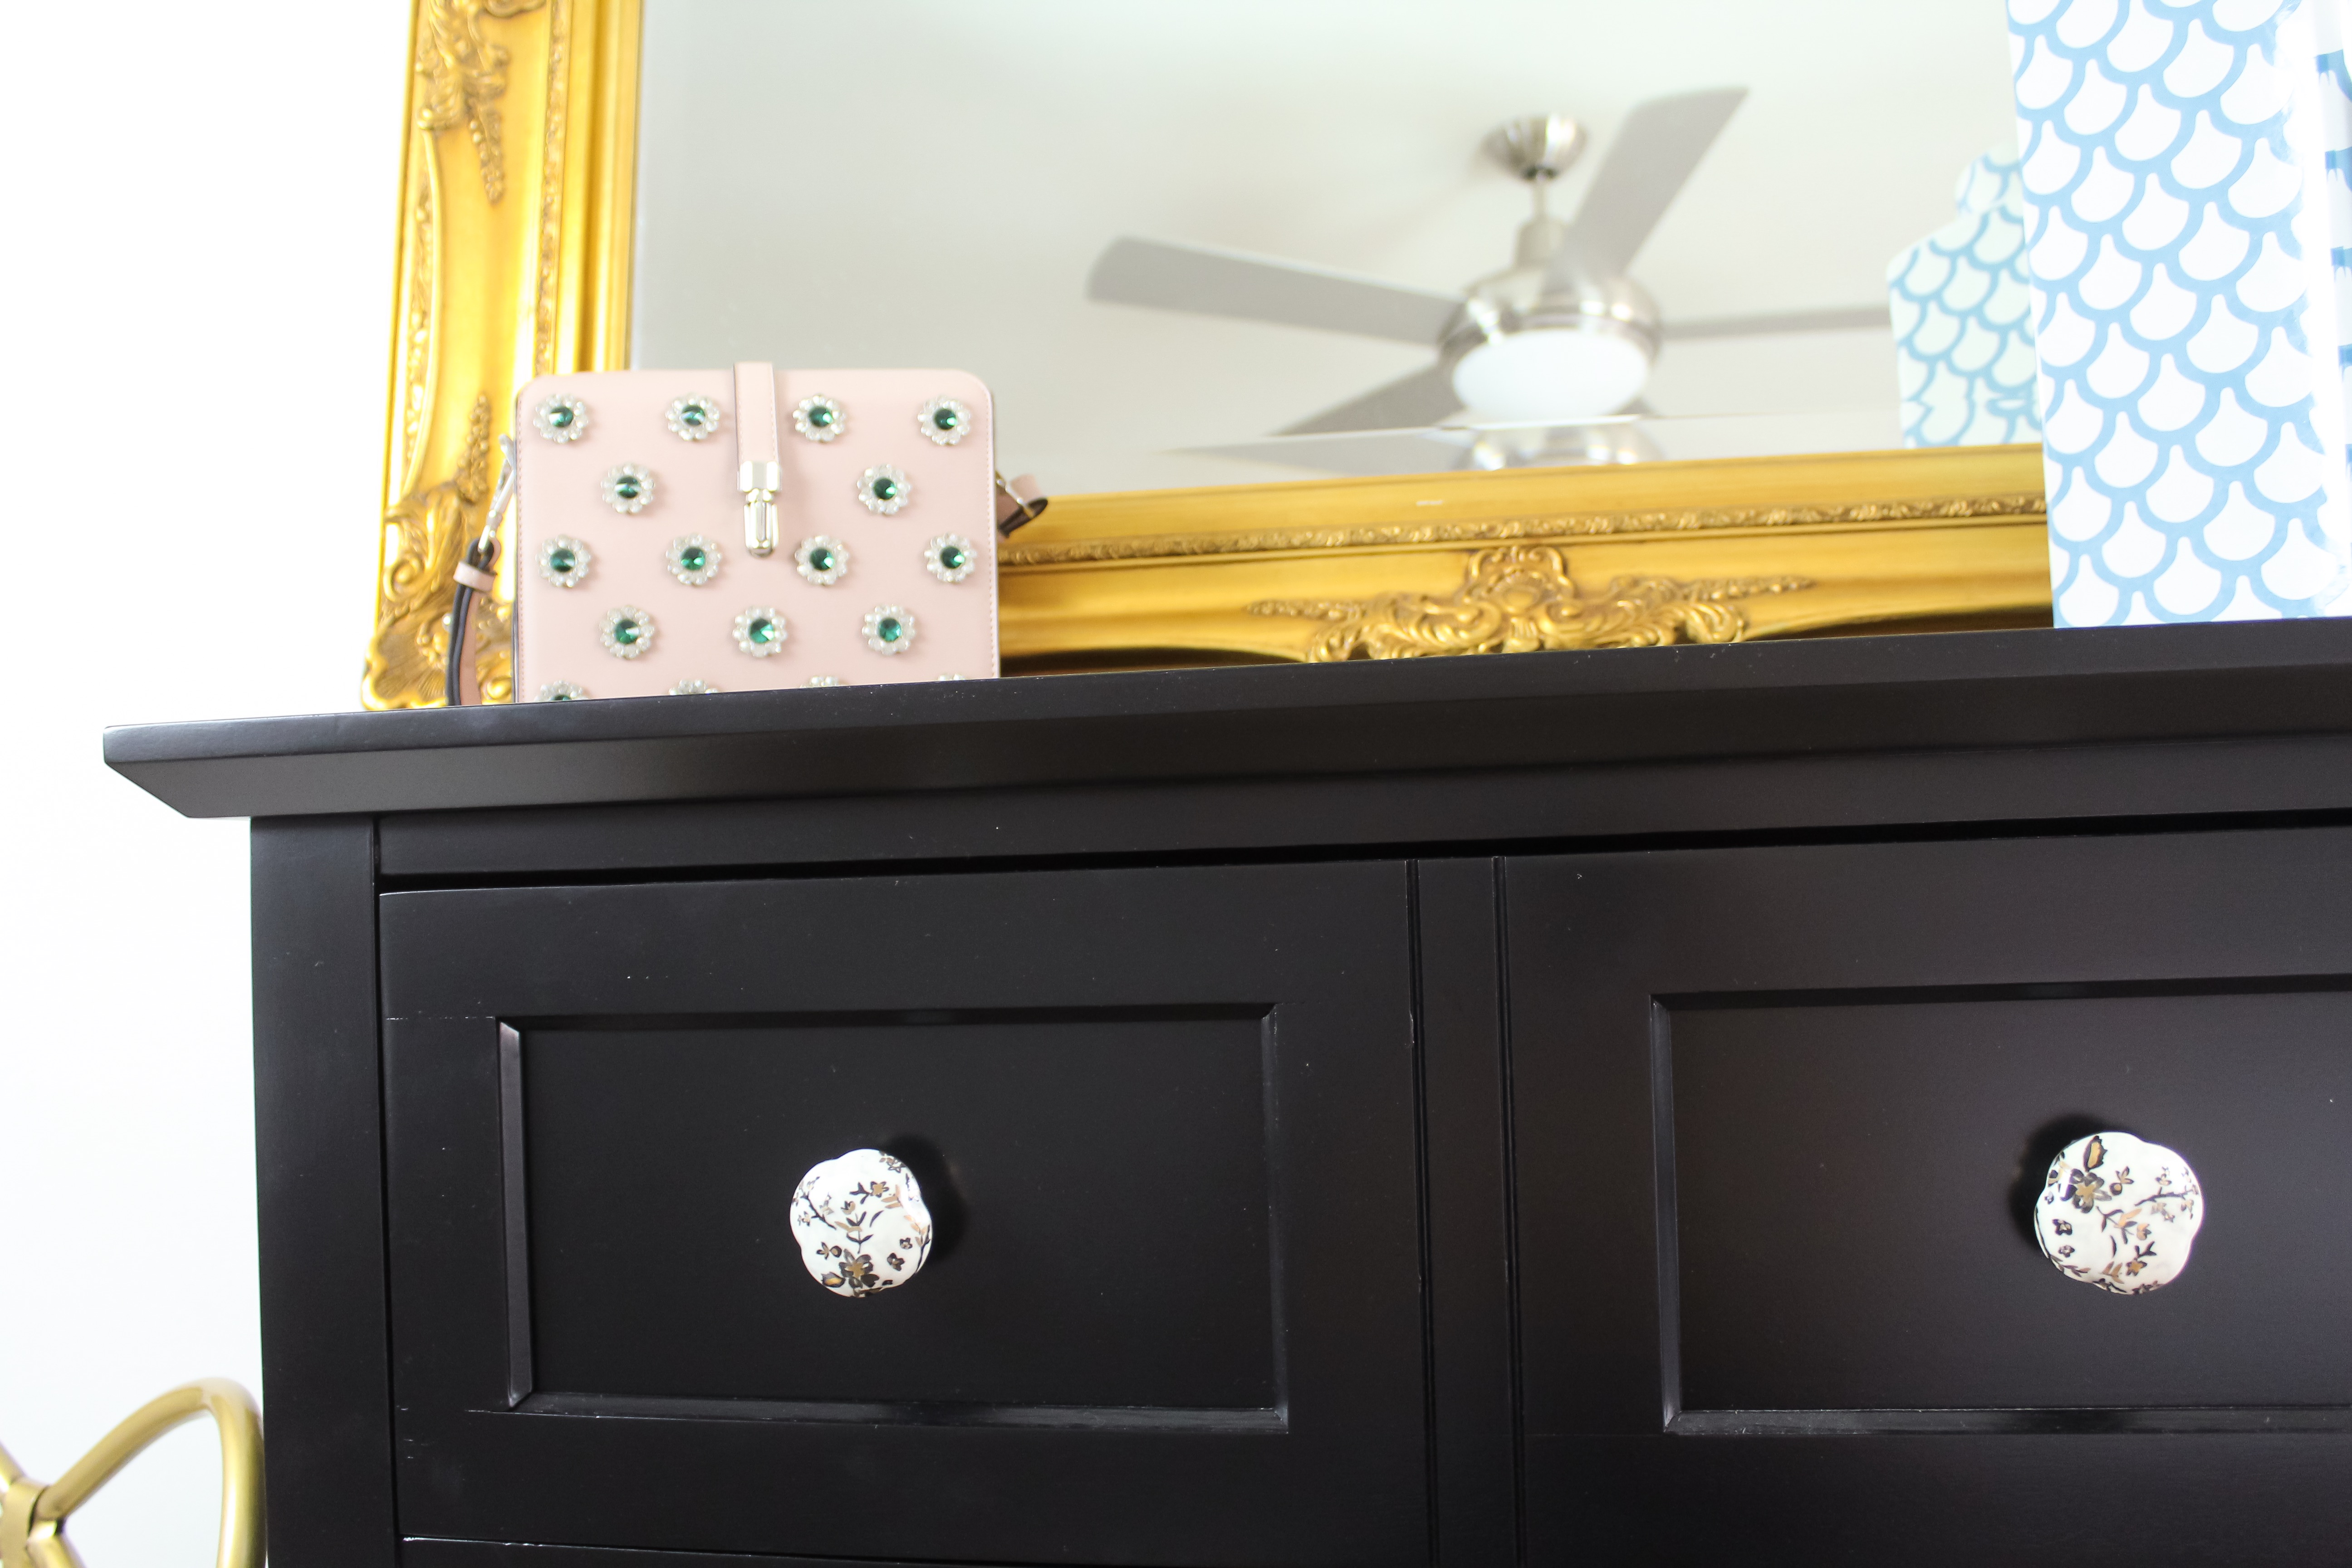 Accents of Gold, Turquoise, Rose and Decorative Knobs | Bedroom Oasis